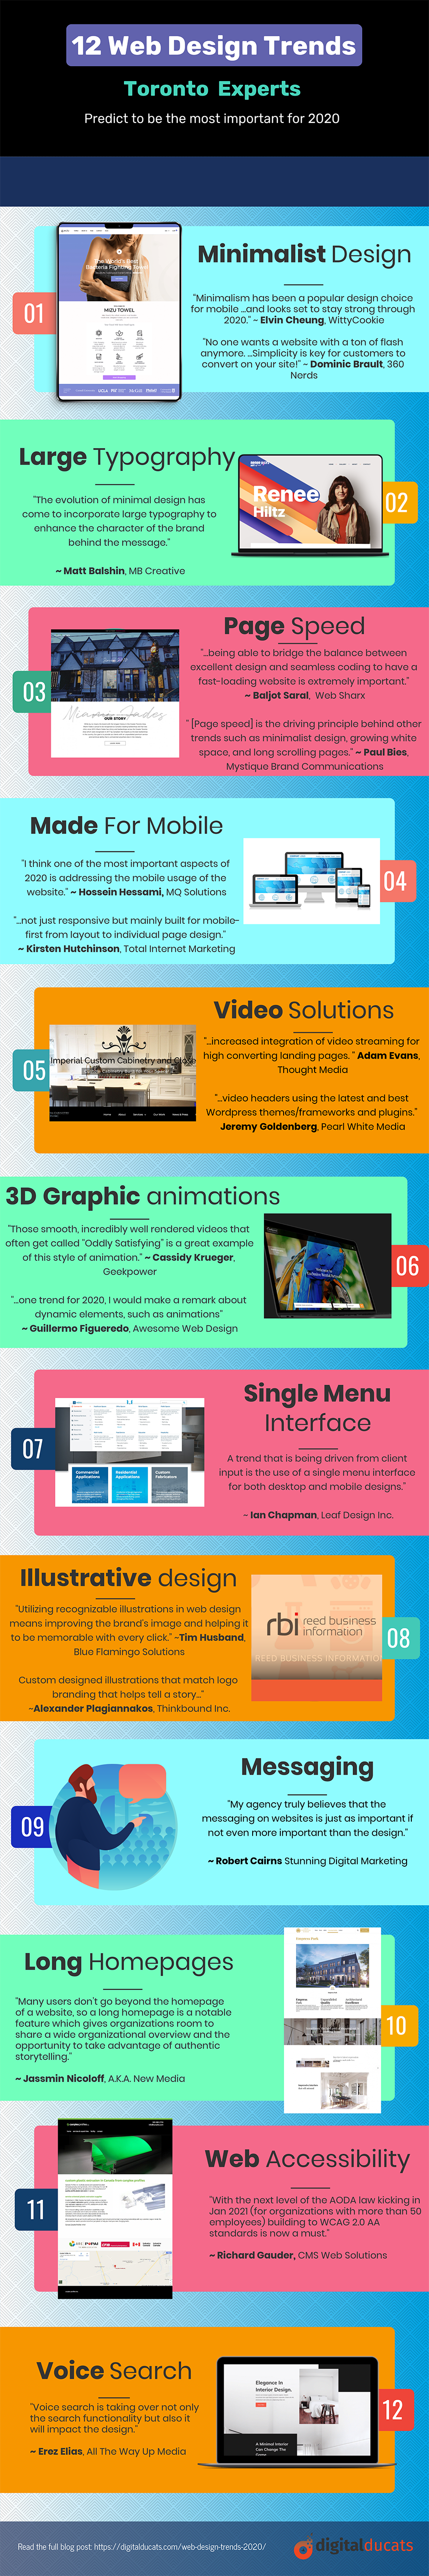 12 of the Most Important Web Design Trends In 2020 [Infographic]